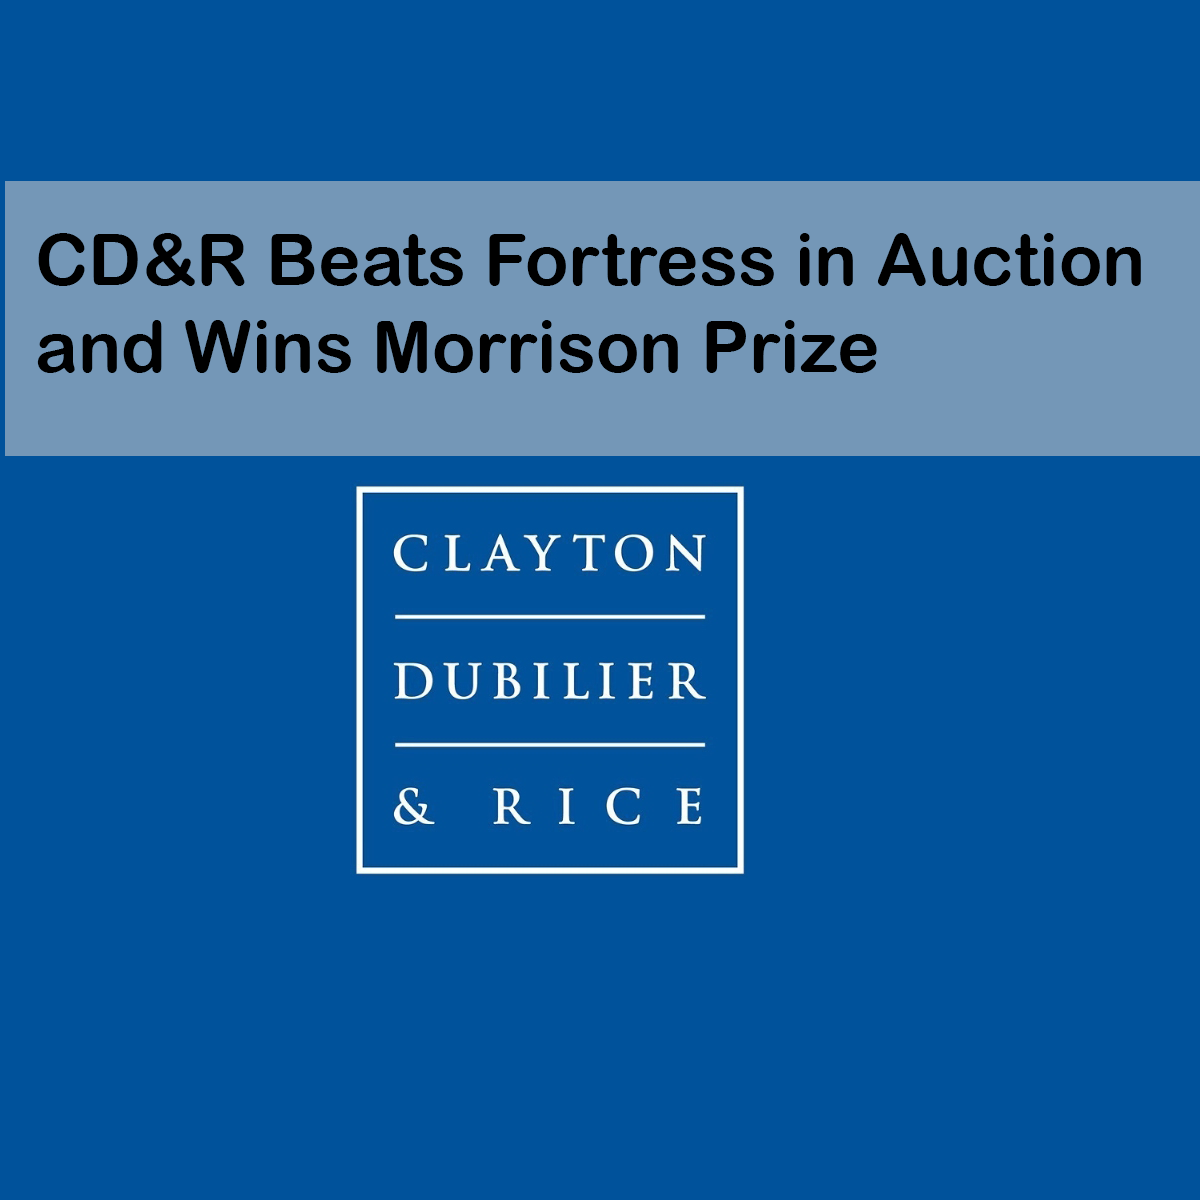 CD&R Beats Fortress in Auction and Wins Morrison Prize